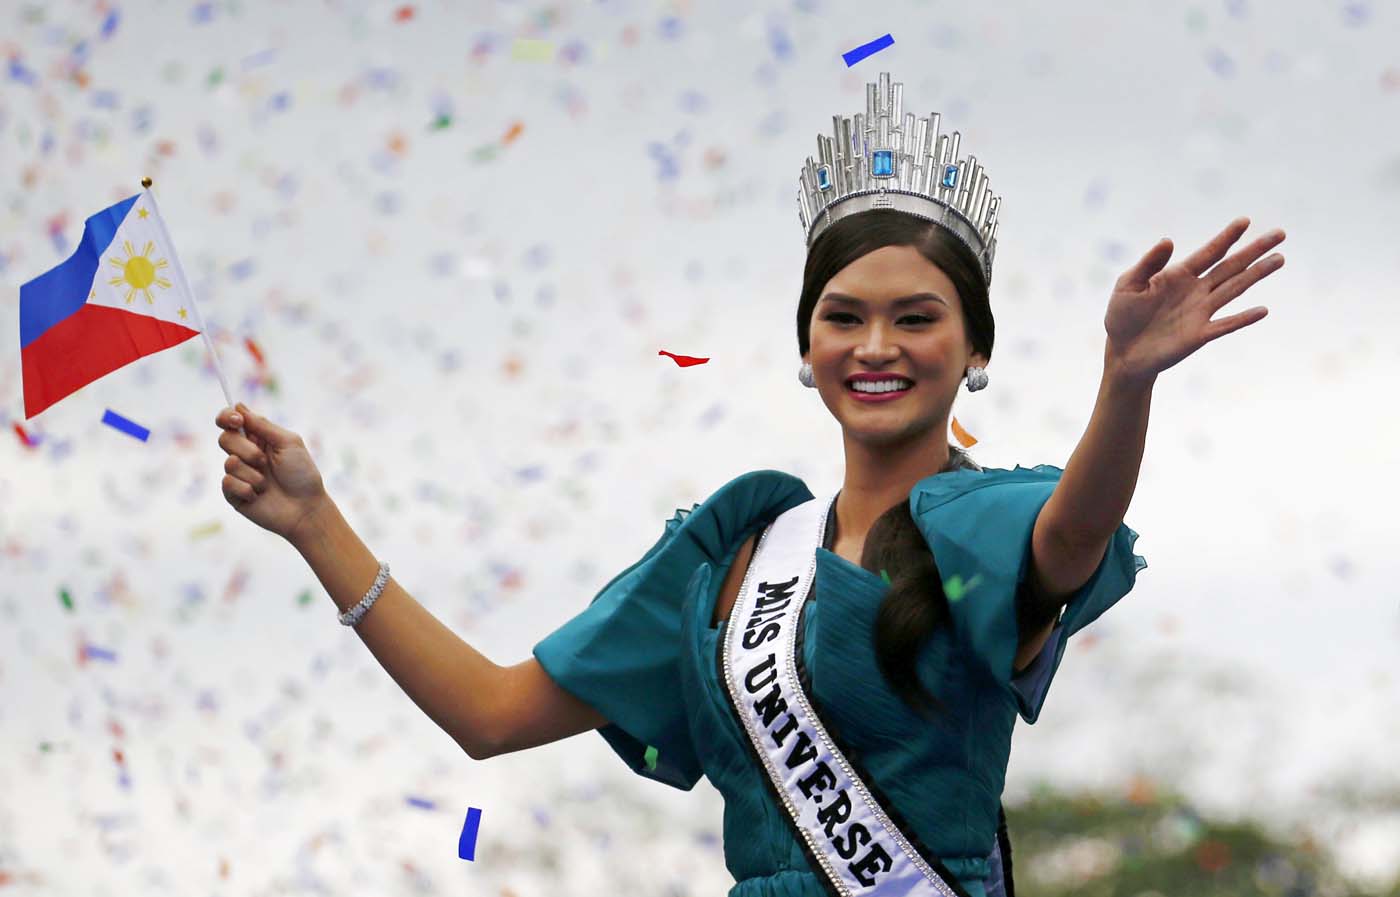 Miss Universe 2015 Pia Alonzo Wurtzbach holds a miniature Philippines flag as she waves to the crowd during a motorcade along Roxas Boulevard in Manila, January 25, 2016. Wurtzbach, the first Miss Universe from the Philippines in more than four decades, said on Sunday she will spend her reign bringing awareness to issues like HIV and draw support for countries vulnerable to disasters. REUTERS/Erik De Castro      TPX IMAGES OF THE DAY